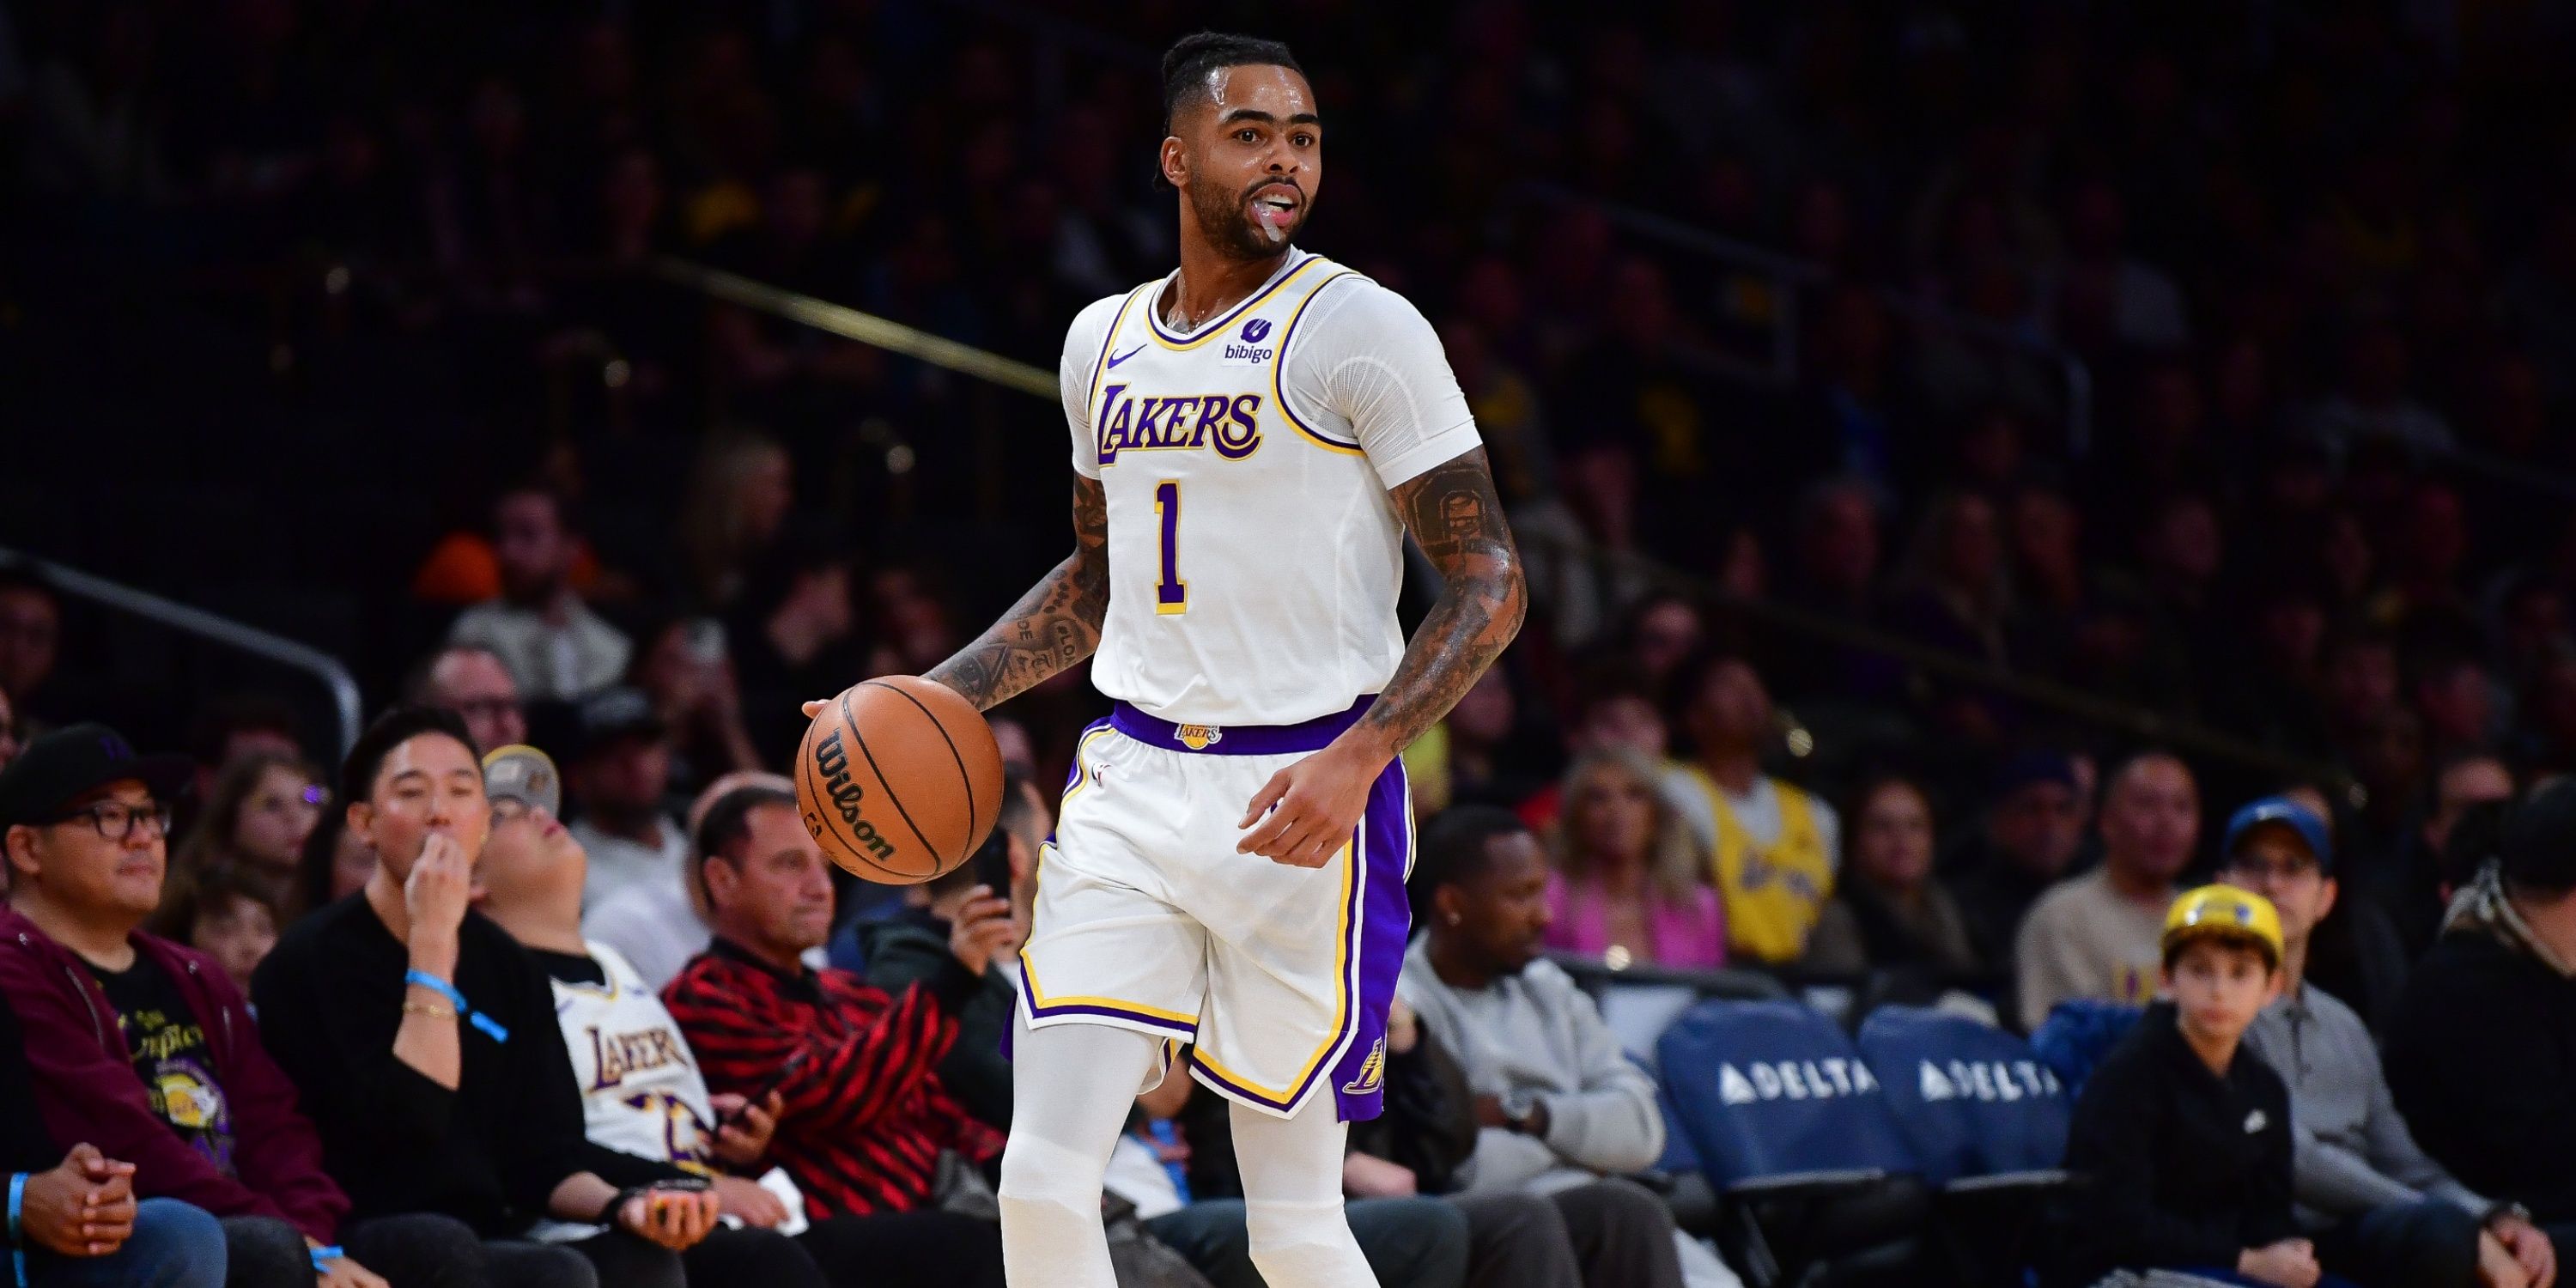 How will Lakers' D'Angelo Russell match up with NBA's elite point